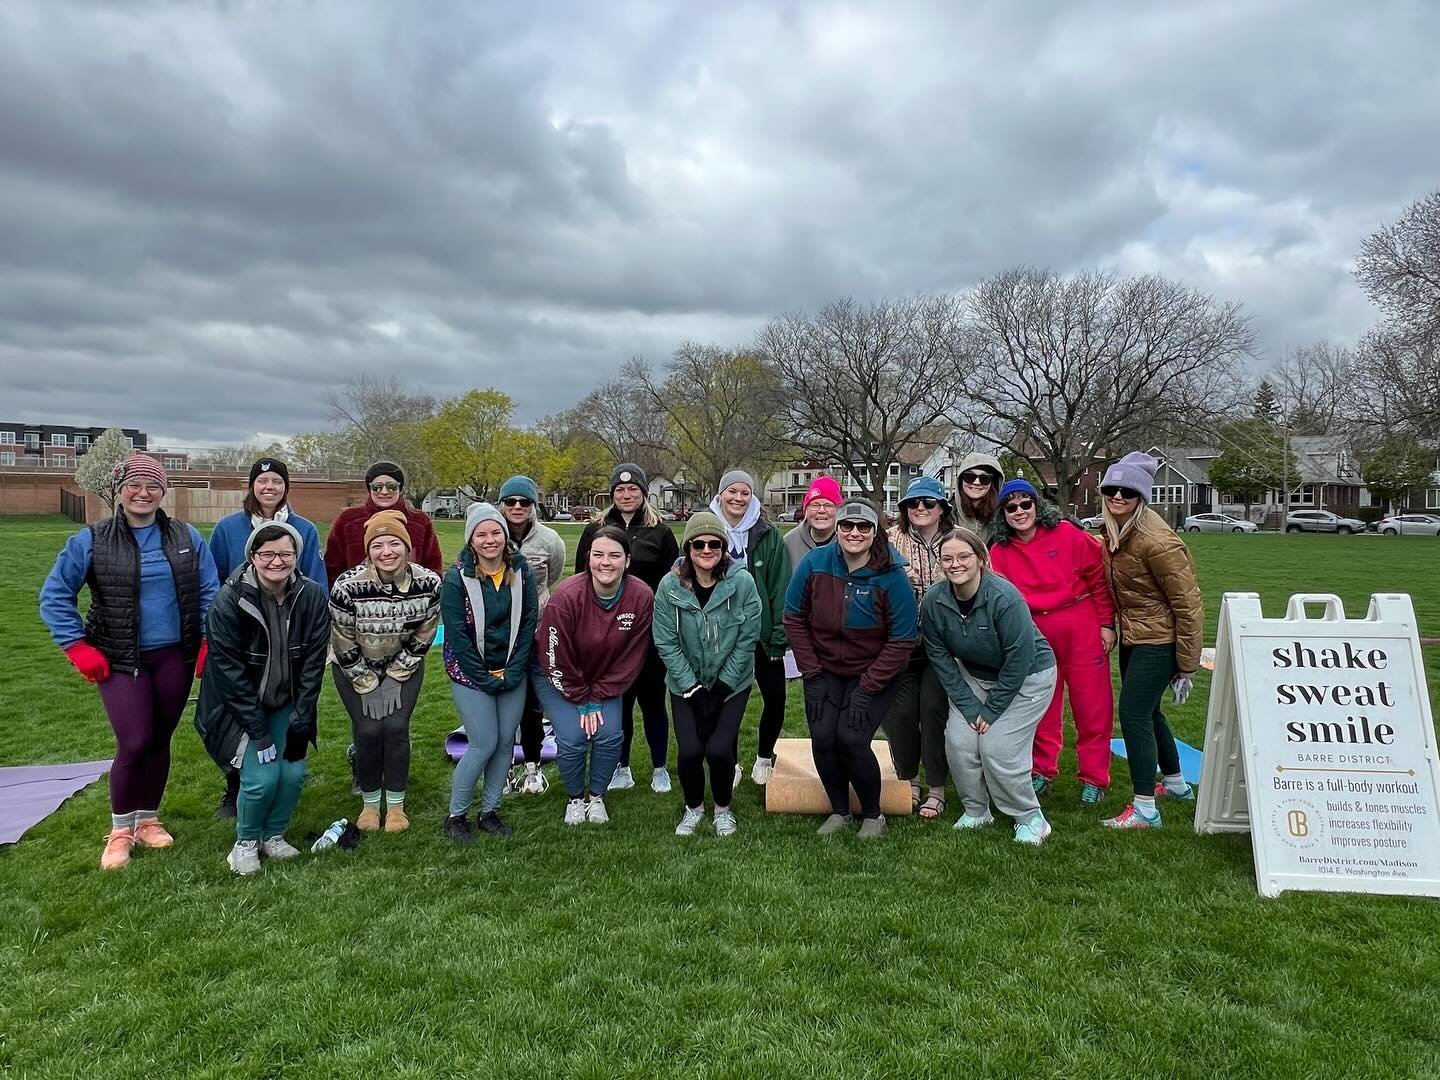 Happy Earth Day!! 🌎💚🌳Even though the &ldquo;Spring&rdquo; weather didn&rsquo;t pull through for us, we still had a fun morning yesterday with an outdoor class followed by a park clean up at Reynolds Park. 

Thank you to everyone who came out to cl